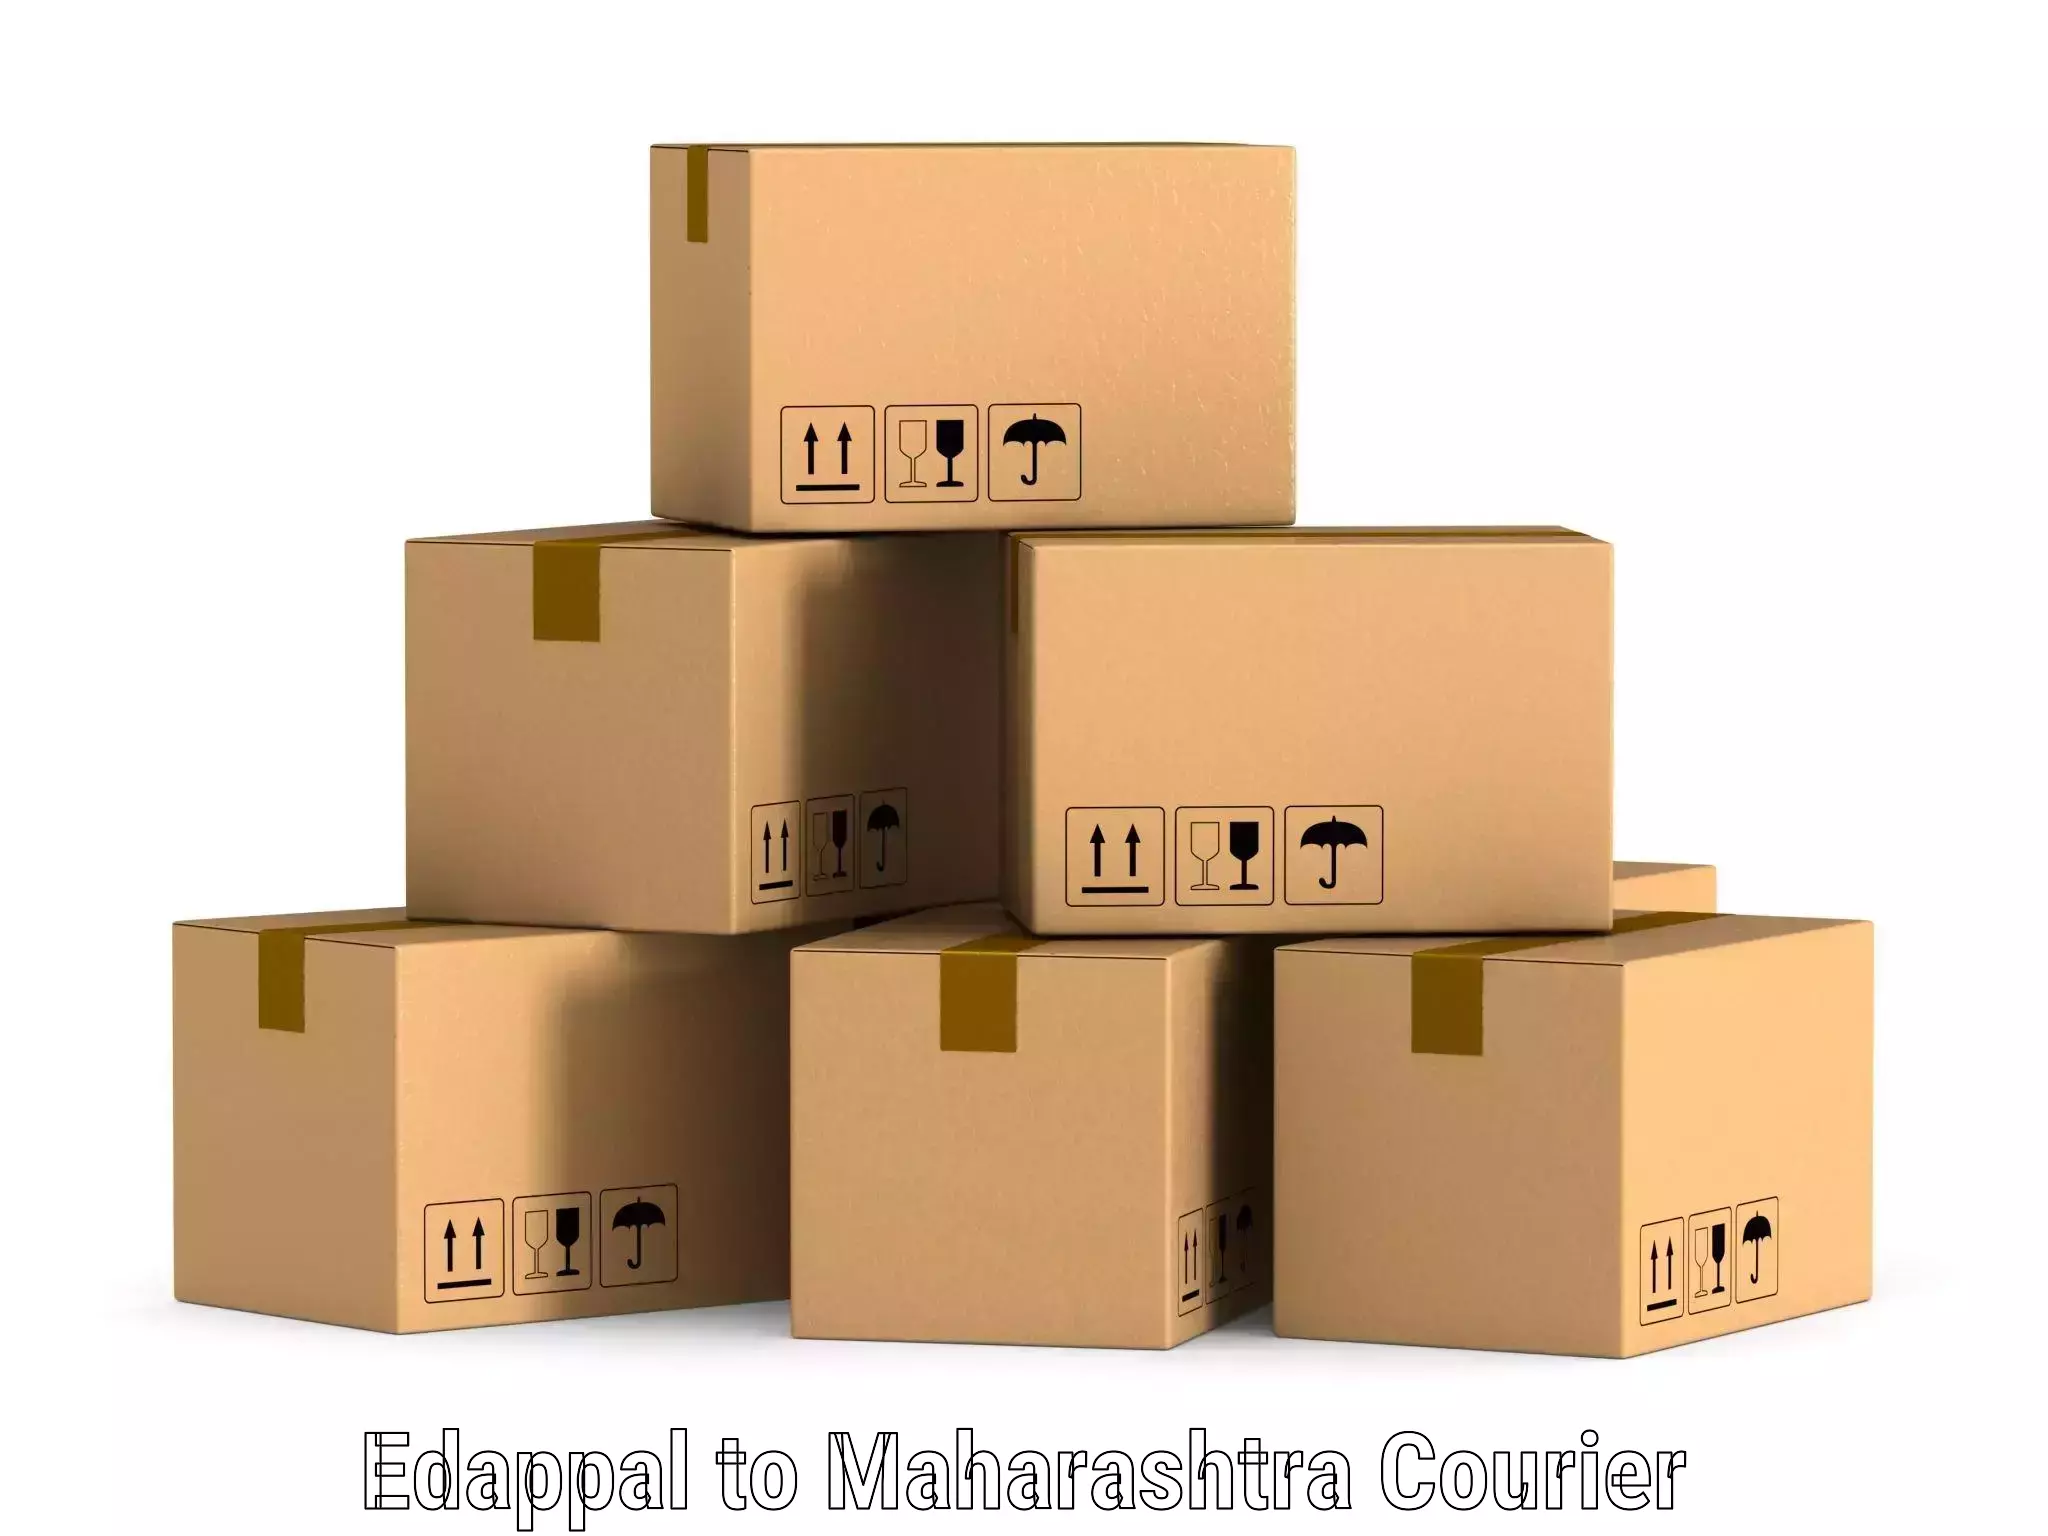 Express courier facilities Edappal to DY Patil Vidyapeeth Pune